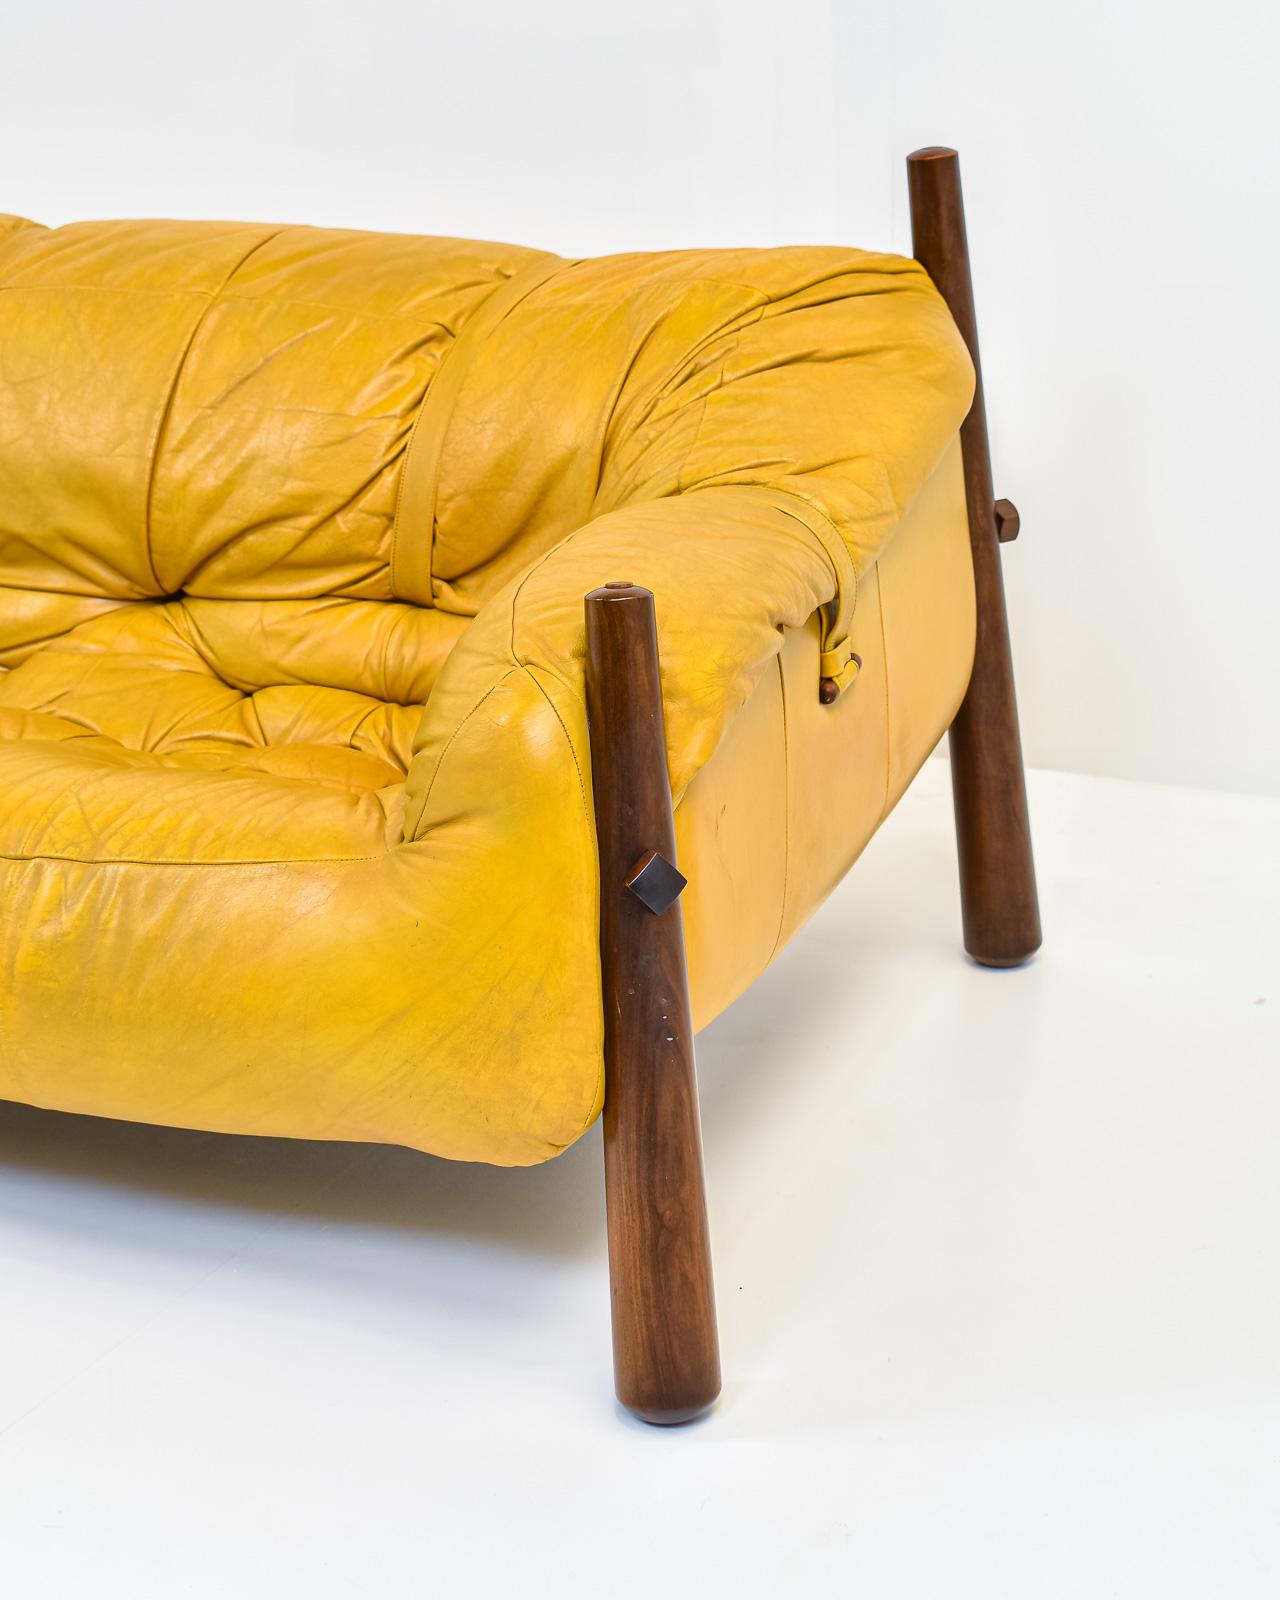 Mustard Yellow Leather Three-Seater Sofa by Percival Lafer, model 'MP-81' 2